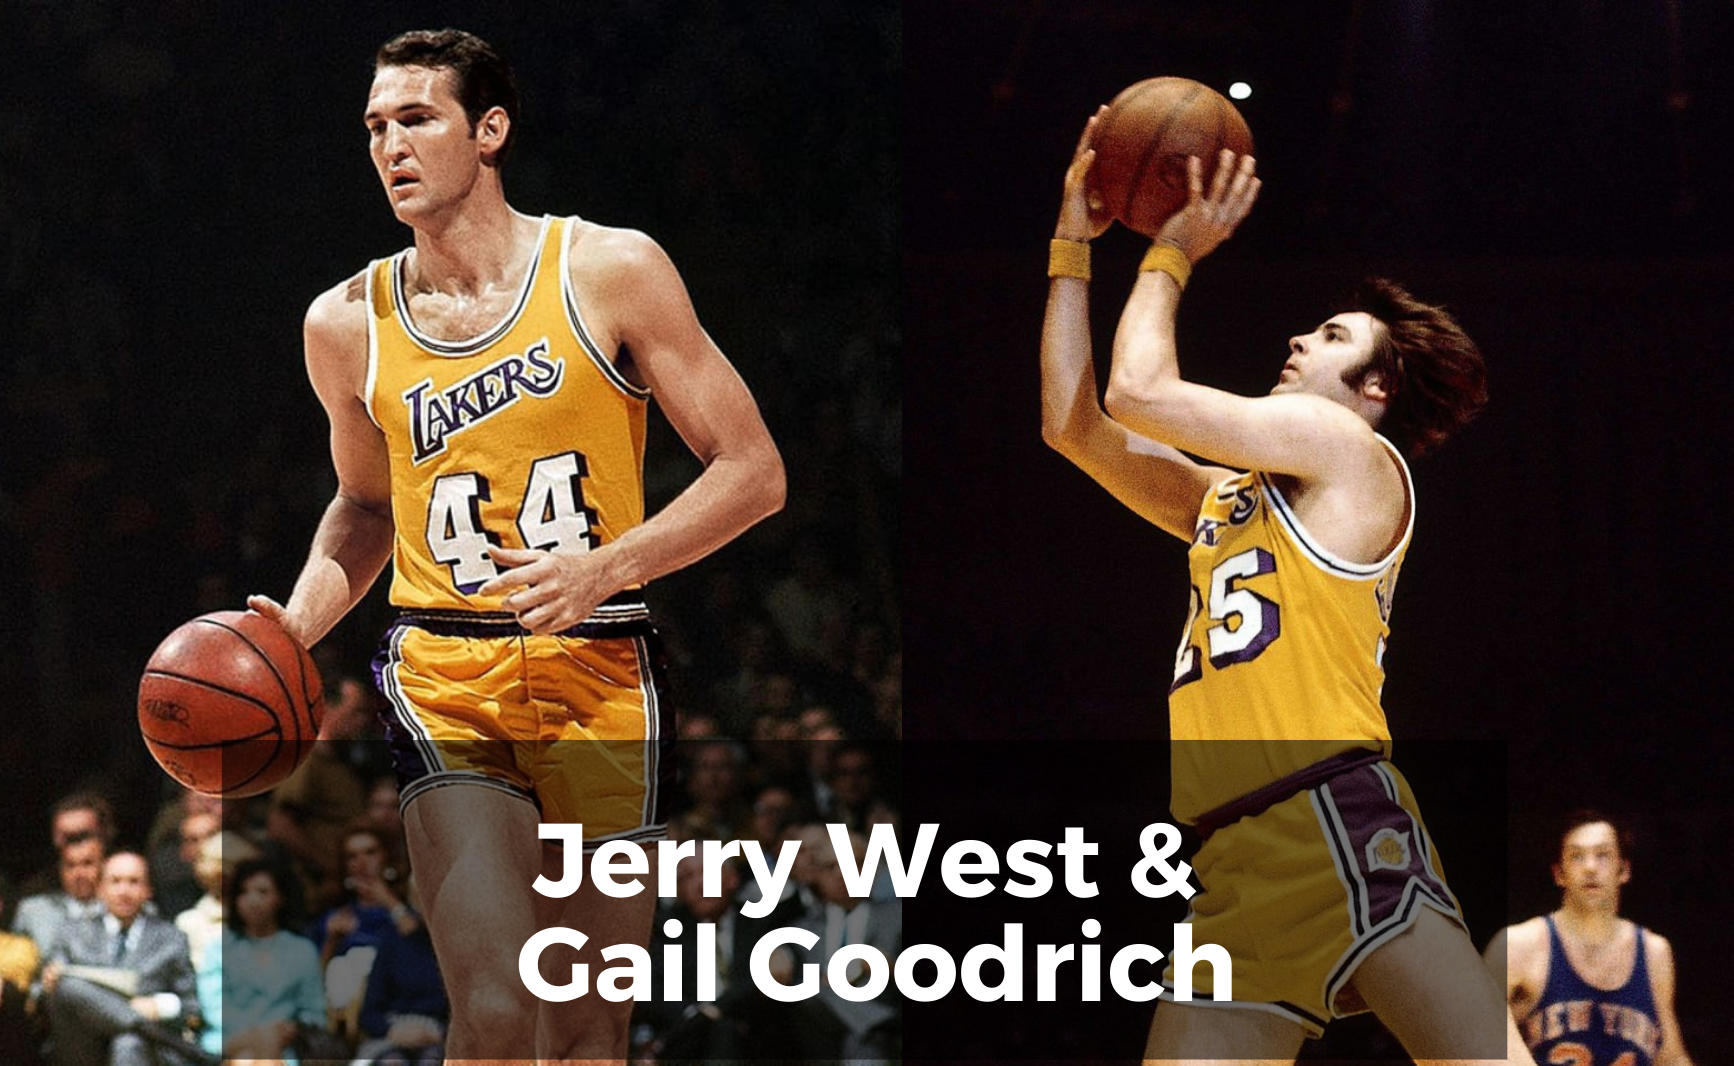 Jerry West and Gail Goodrich